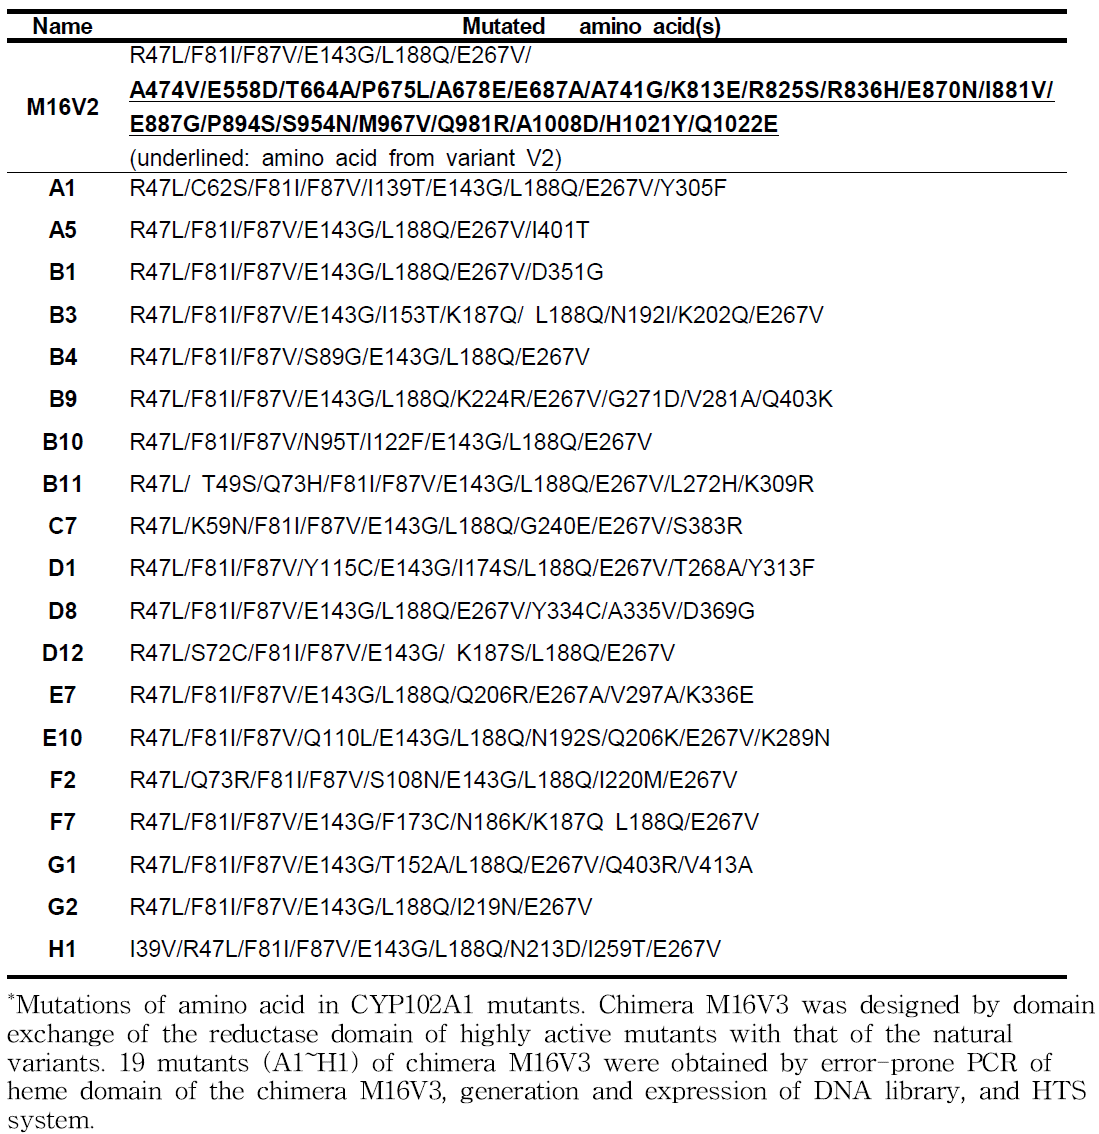 Variations in the amino acid sequences of the CYP102A1 chimera, M16V3, and its mutants